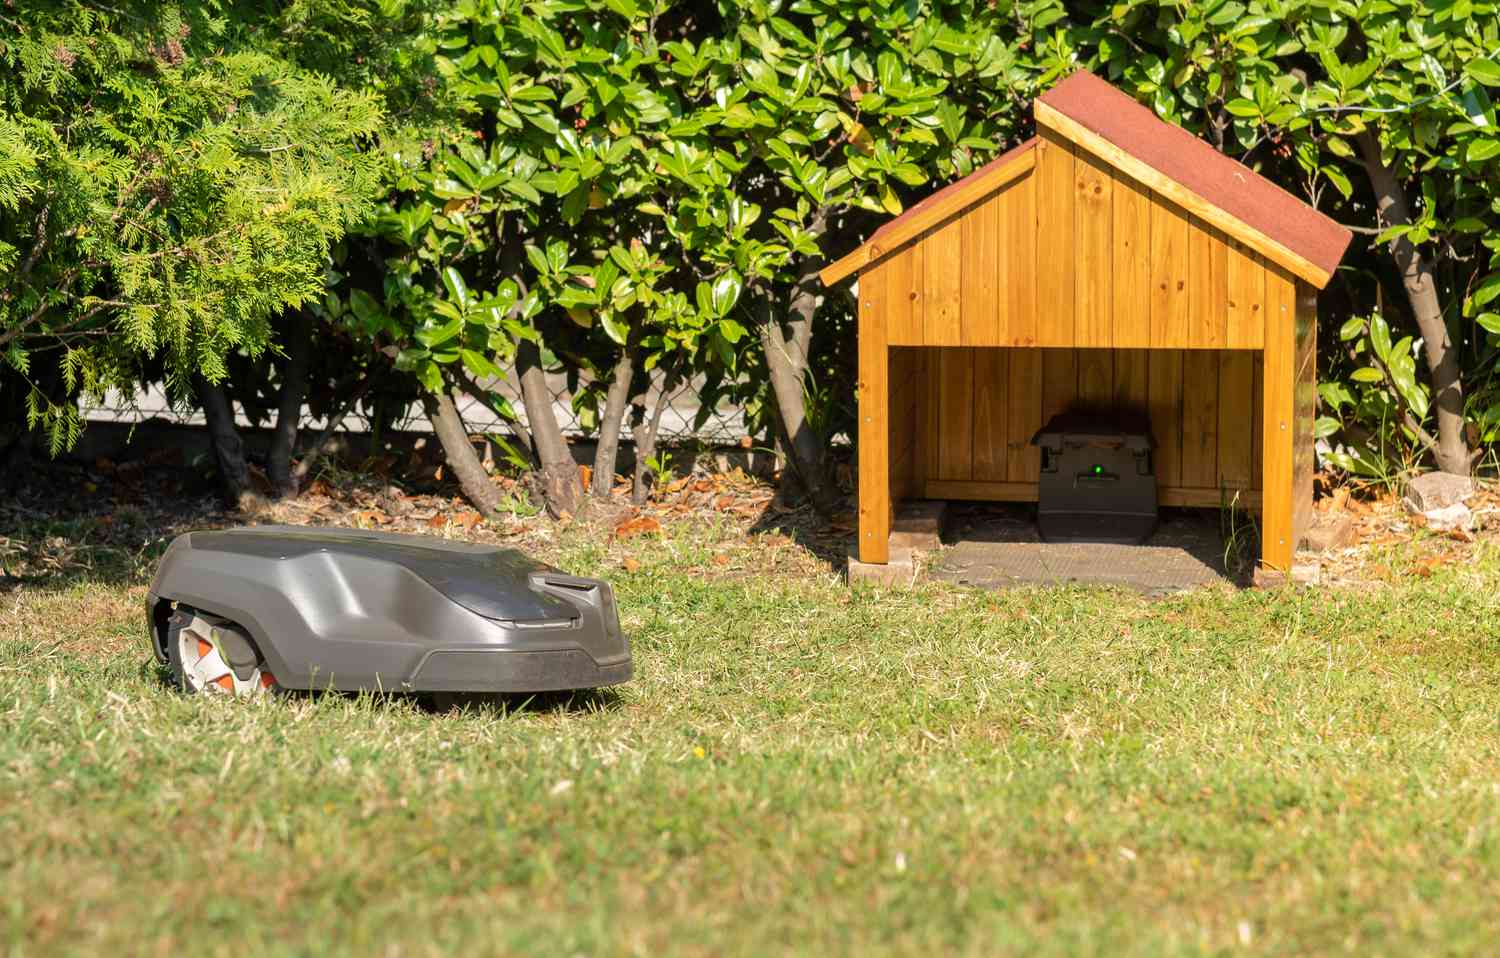 DIY Lawn Mower Shed: Step-by-Step Guide